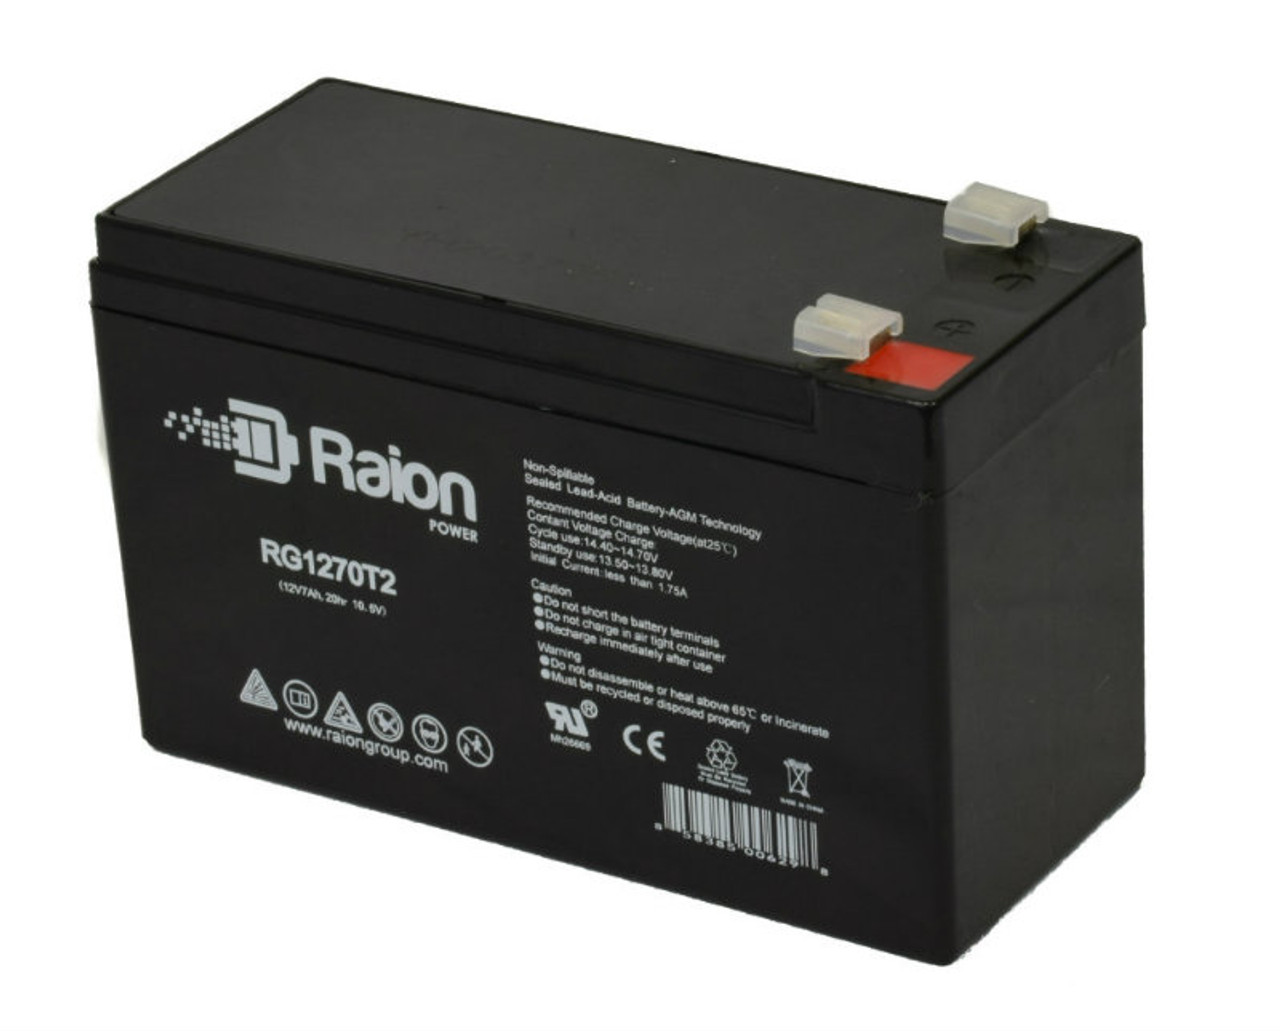 Raion Power RG1270T2 12V 7Ah Rechargeable Battery for ROBITON VRLA12-7